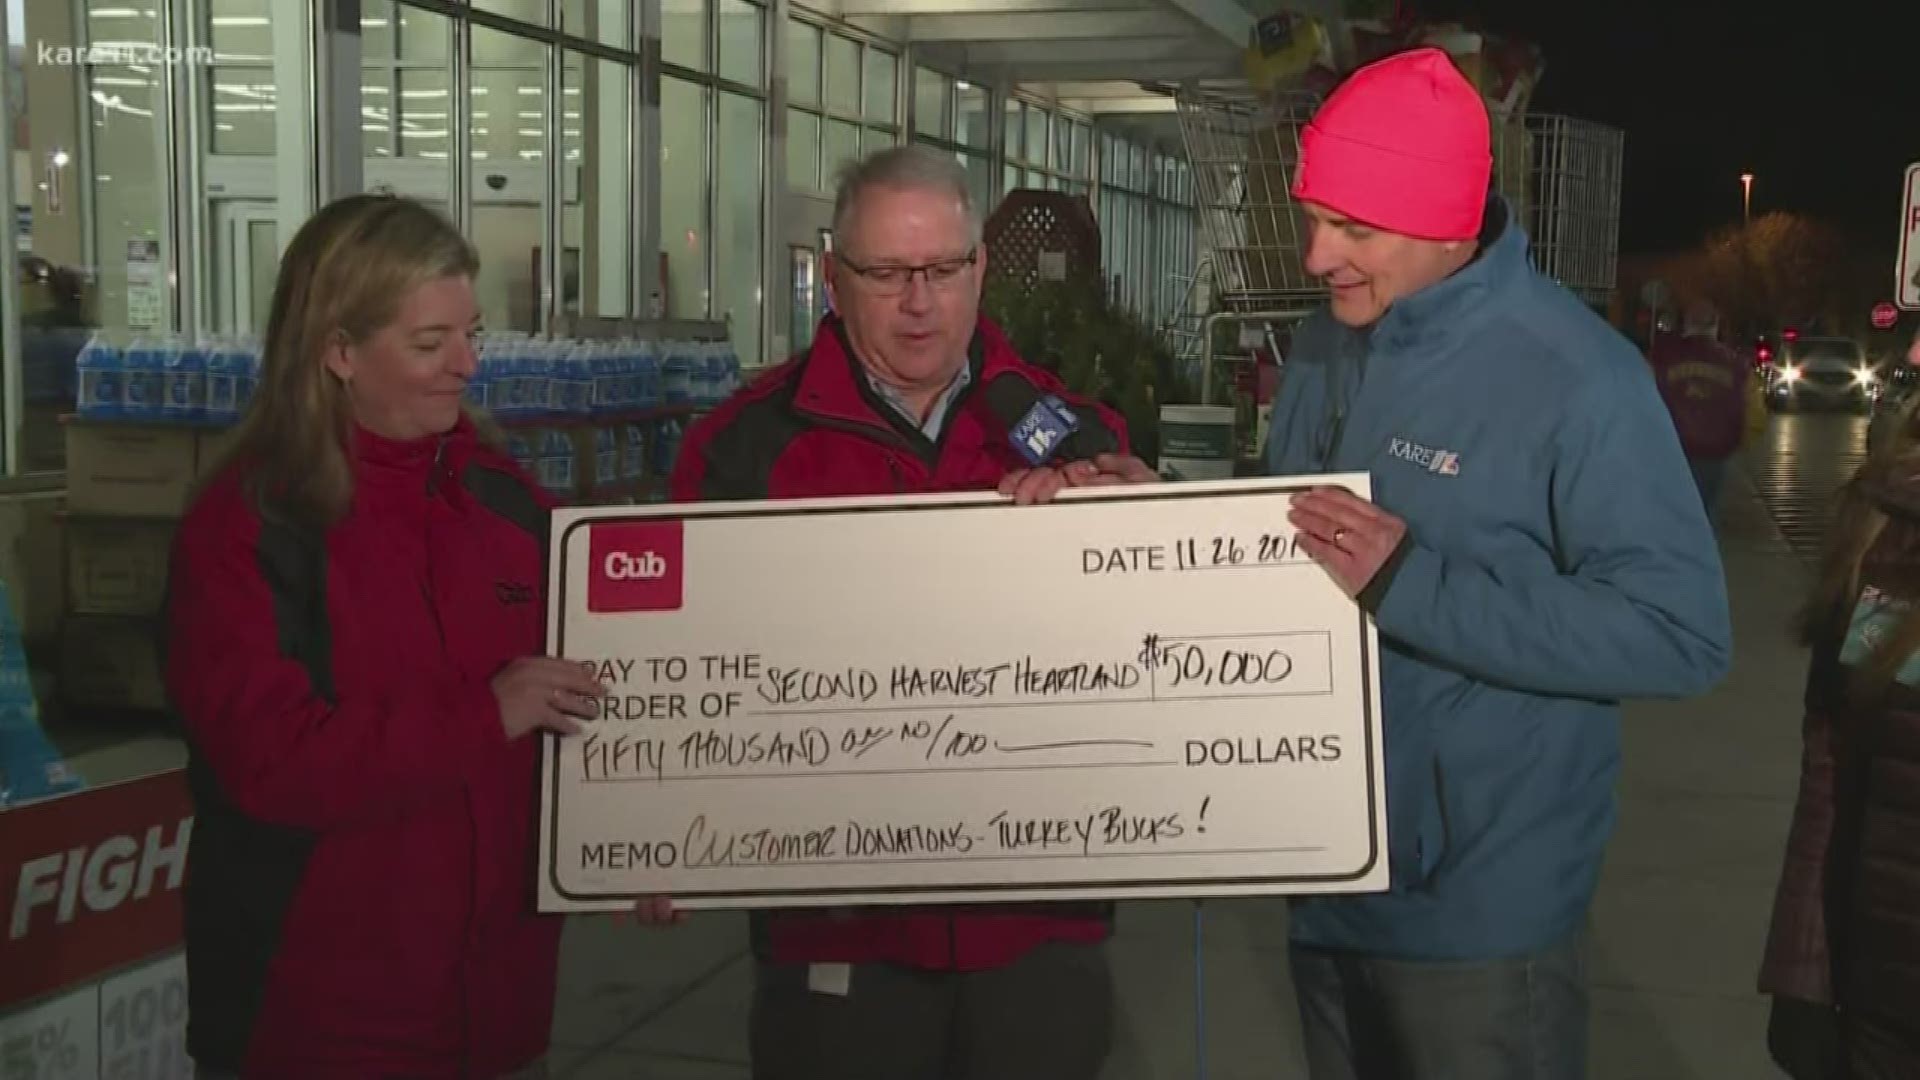 Cub Foods donates $50,000 to Second Harvest Heartland, Team Perk for Food Fight.